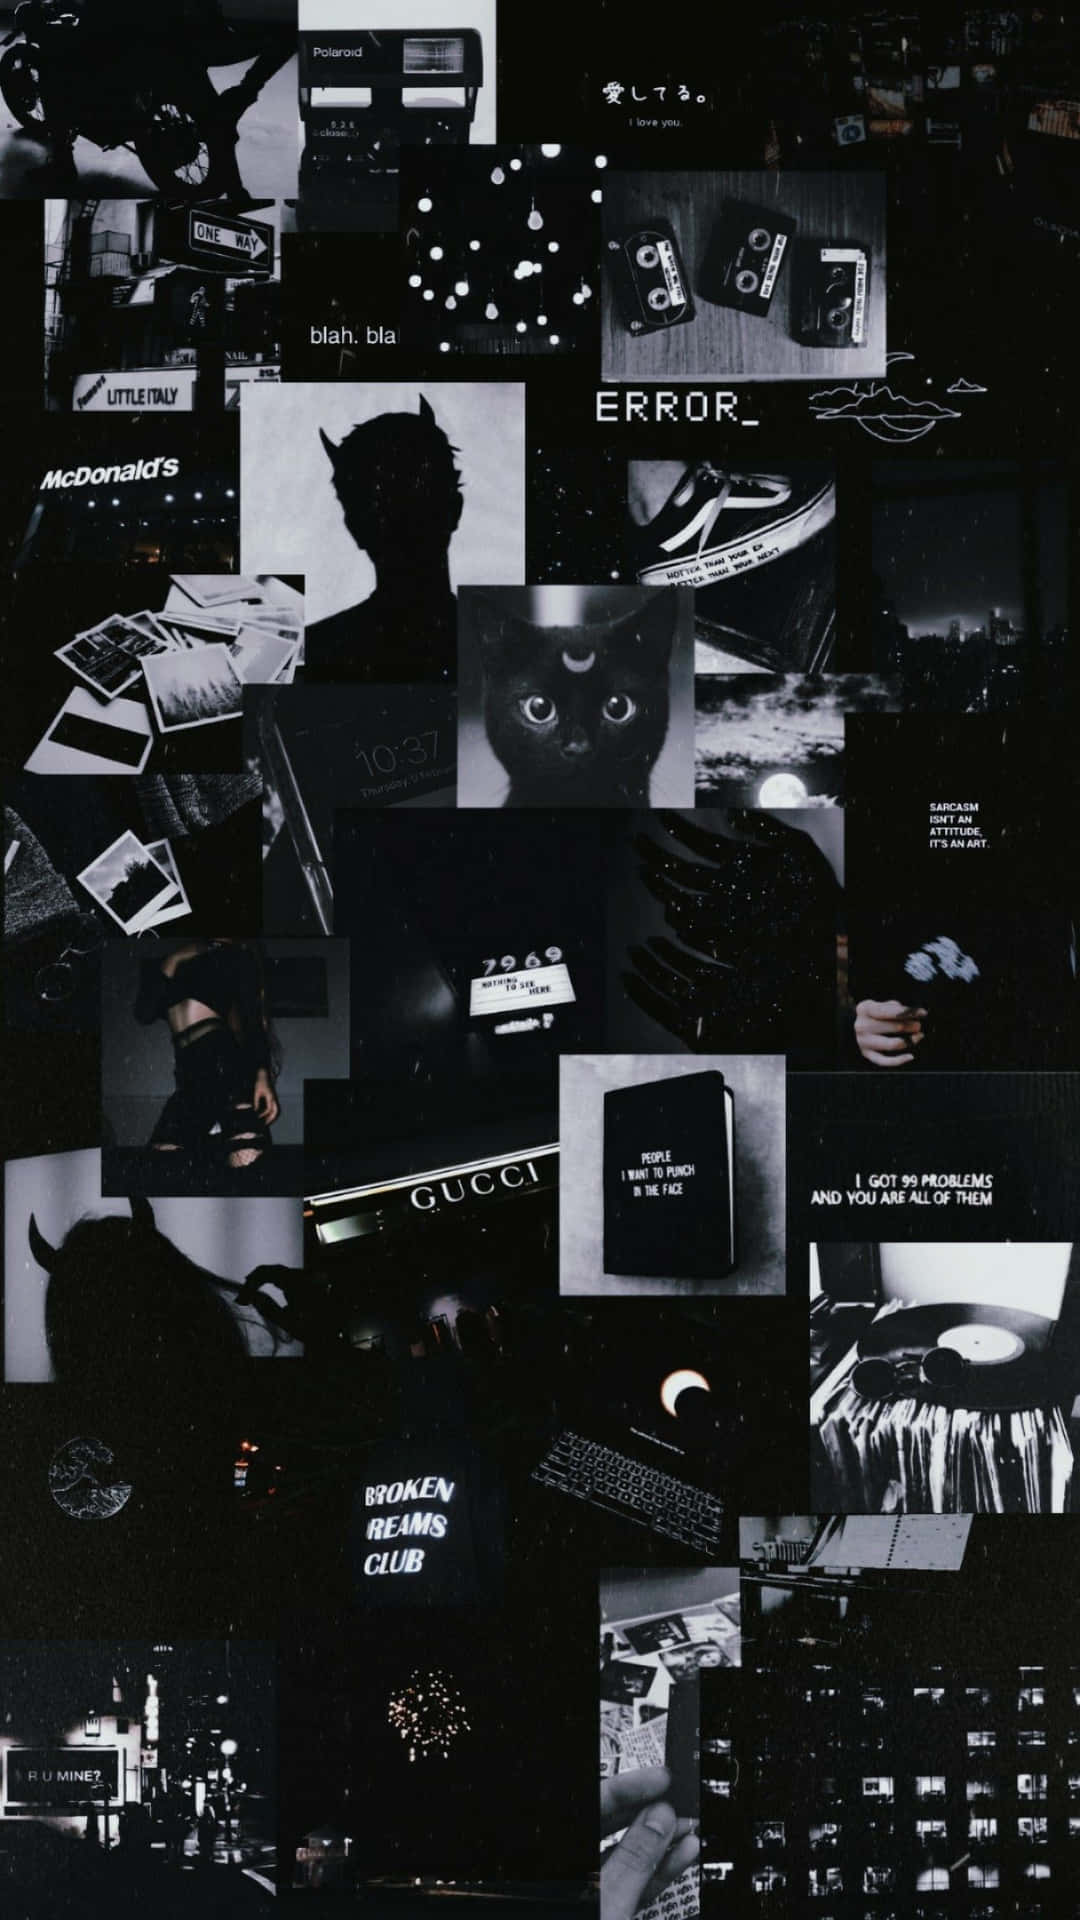 Download Edgy Black Aesthetic Collage Grunge Wallpaper | Wallpapers.com